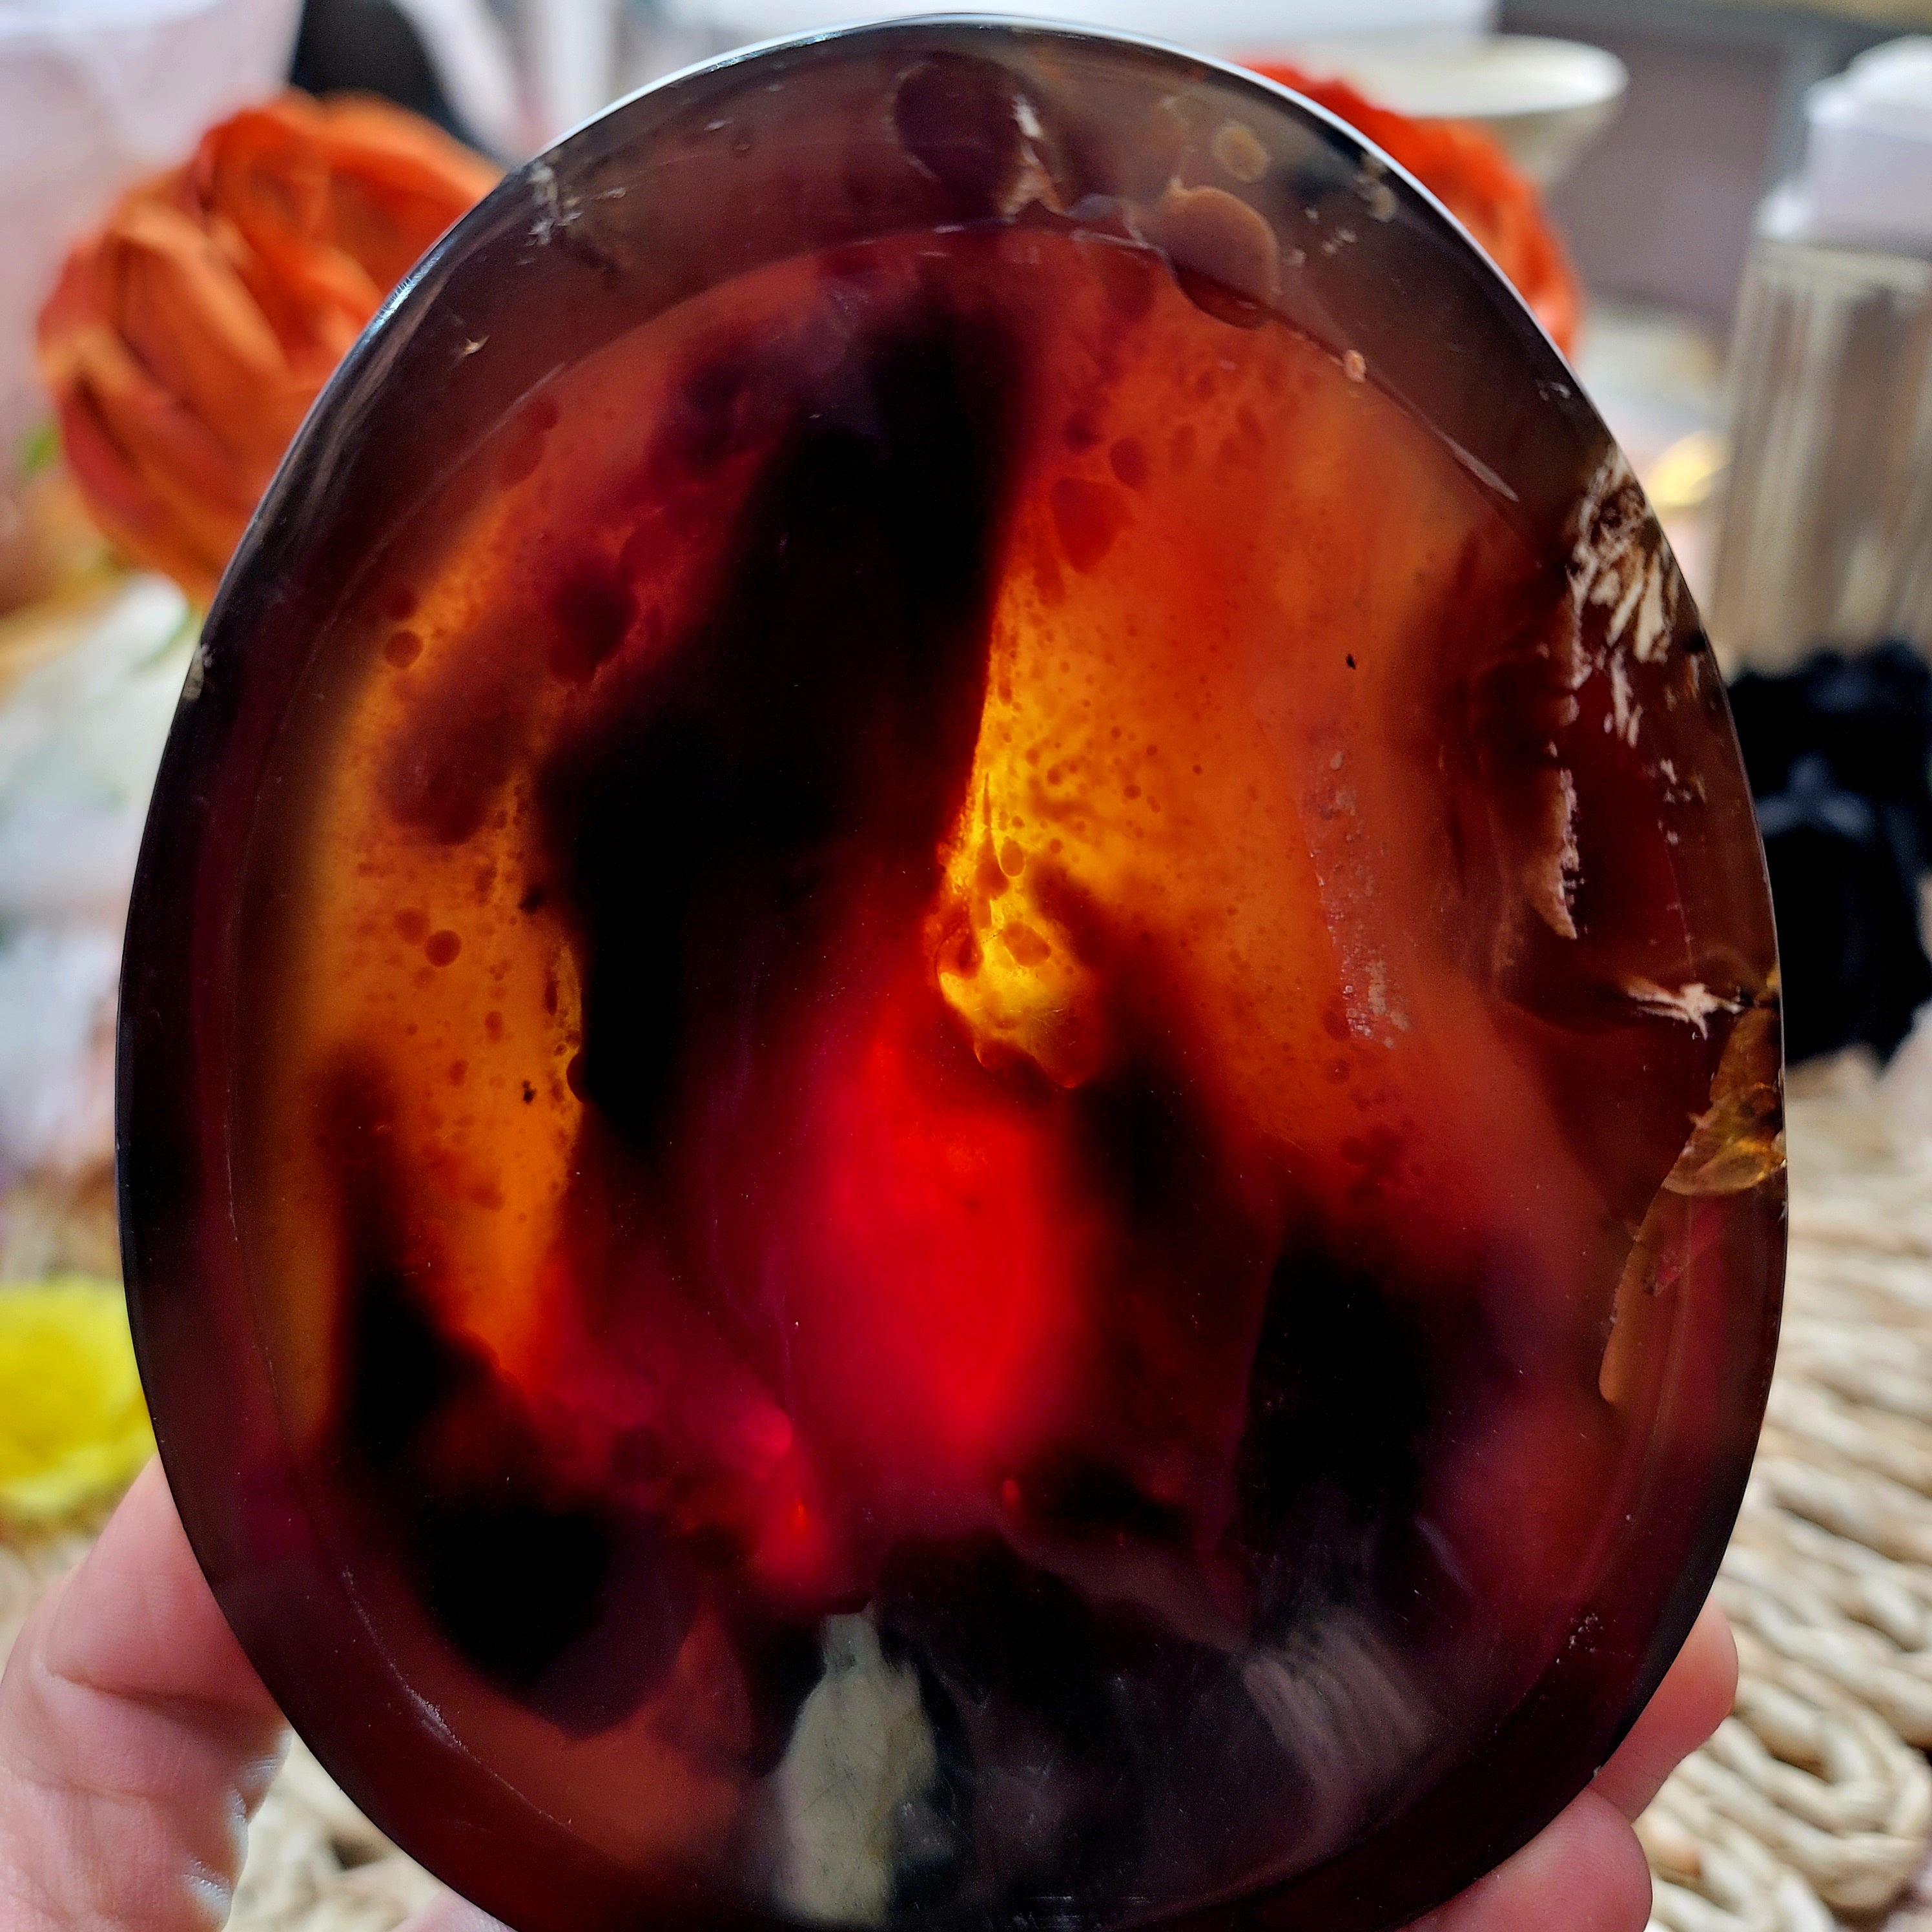 Amber Bowl for Healing, Joy and Protection